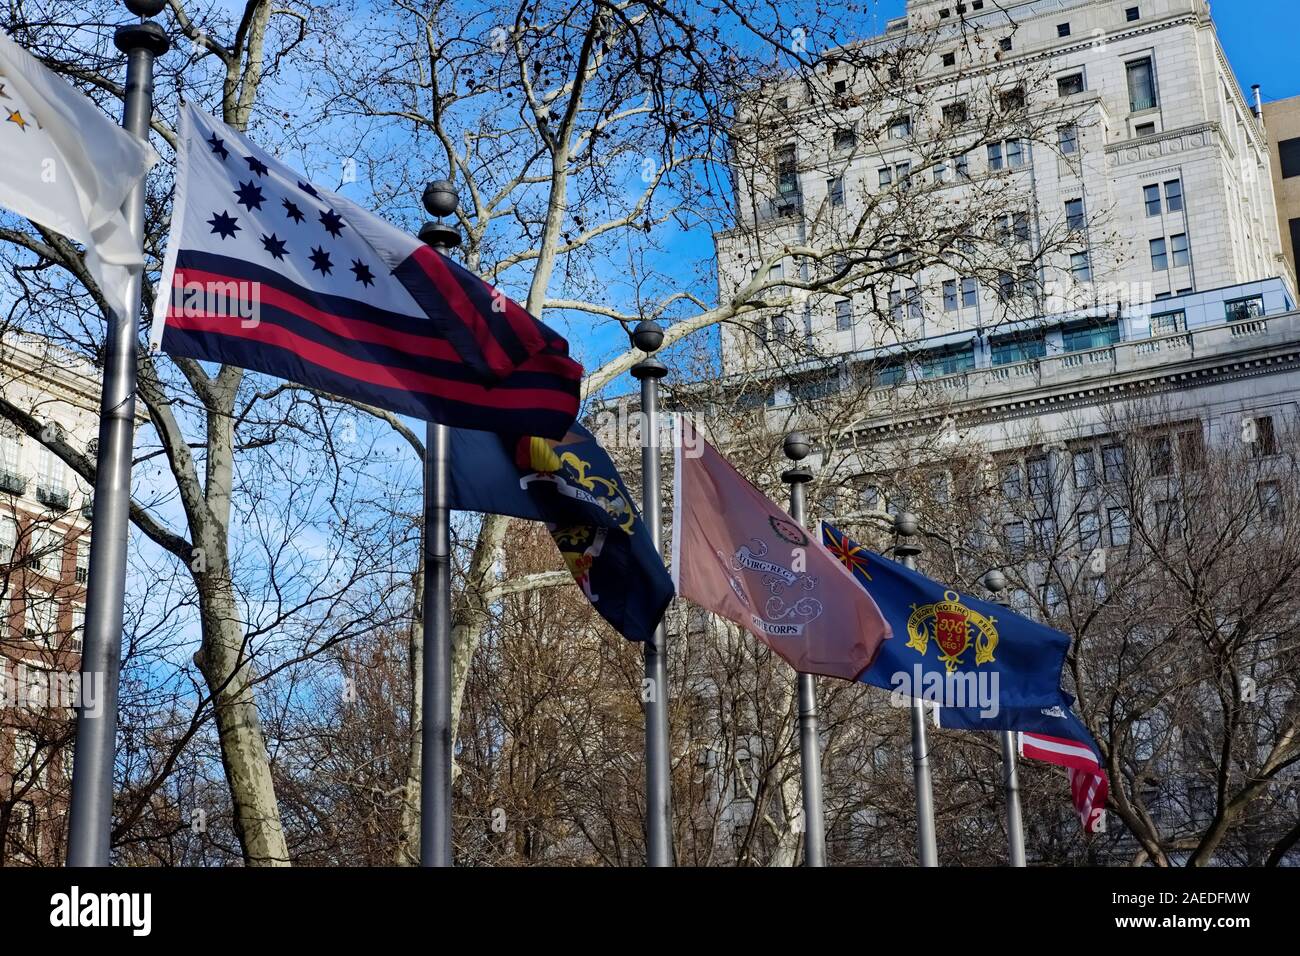 Flags wave on a windy day in Washington Square Park, Philadelphia, PA. Stock Photo